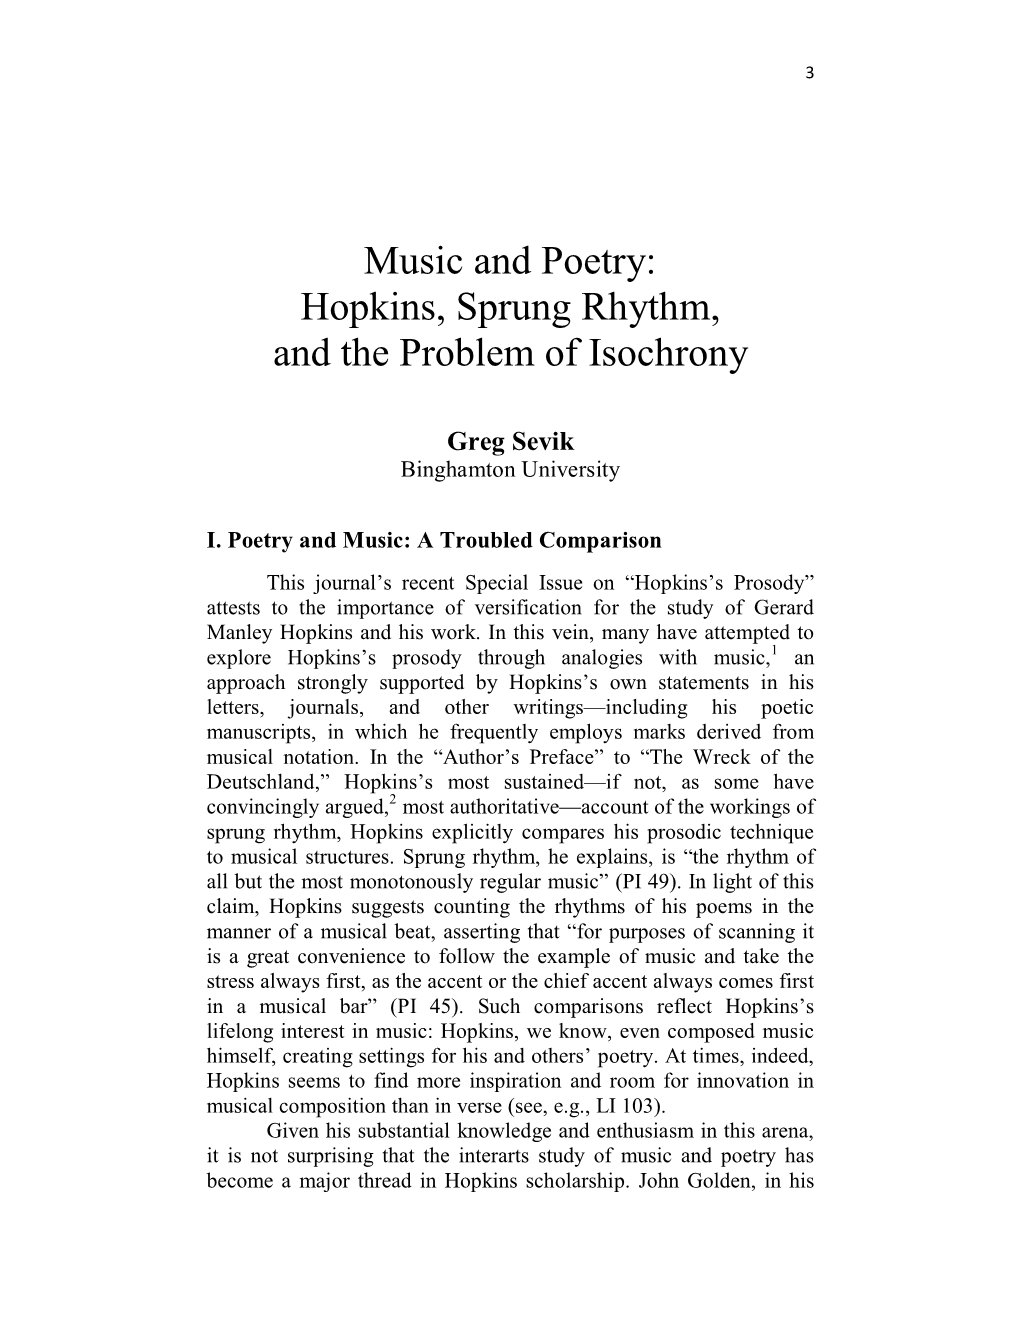 Music and Poetry: Hopkins, Sprung Rhythm, and the Problem of Isochrony